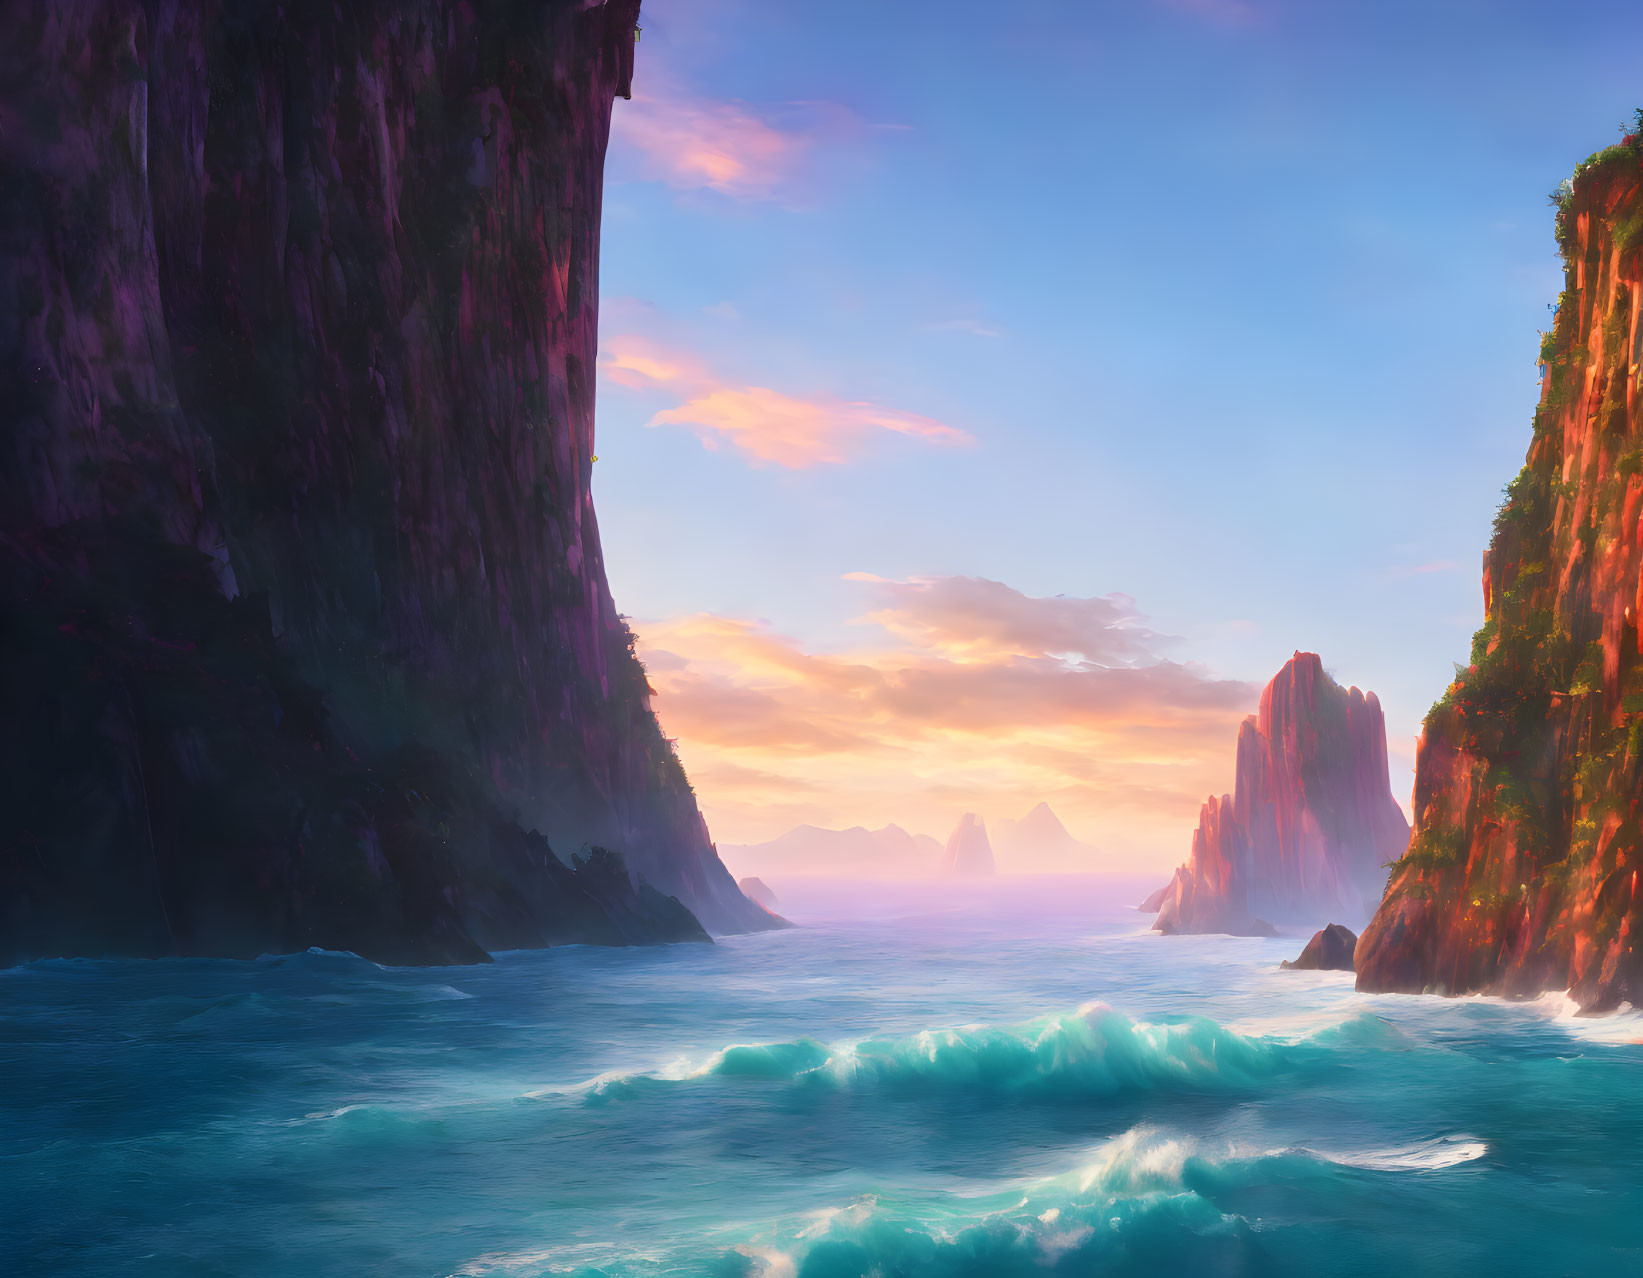 Tranquil ocean cove at sunset with towering cliffs and pastel sky